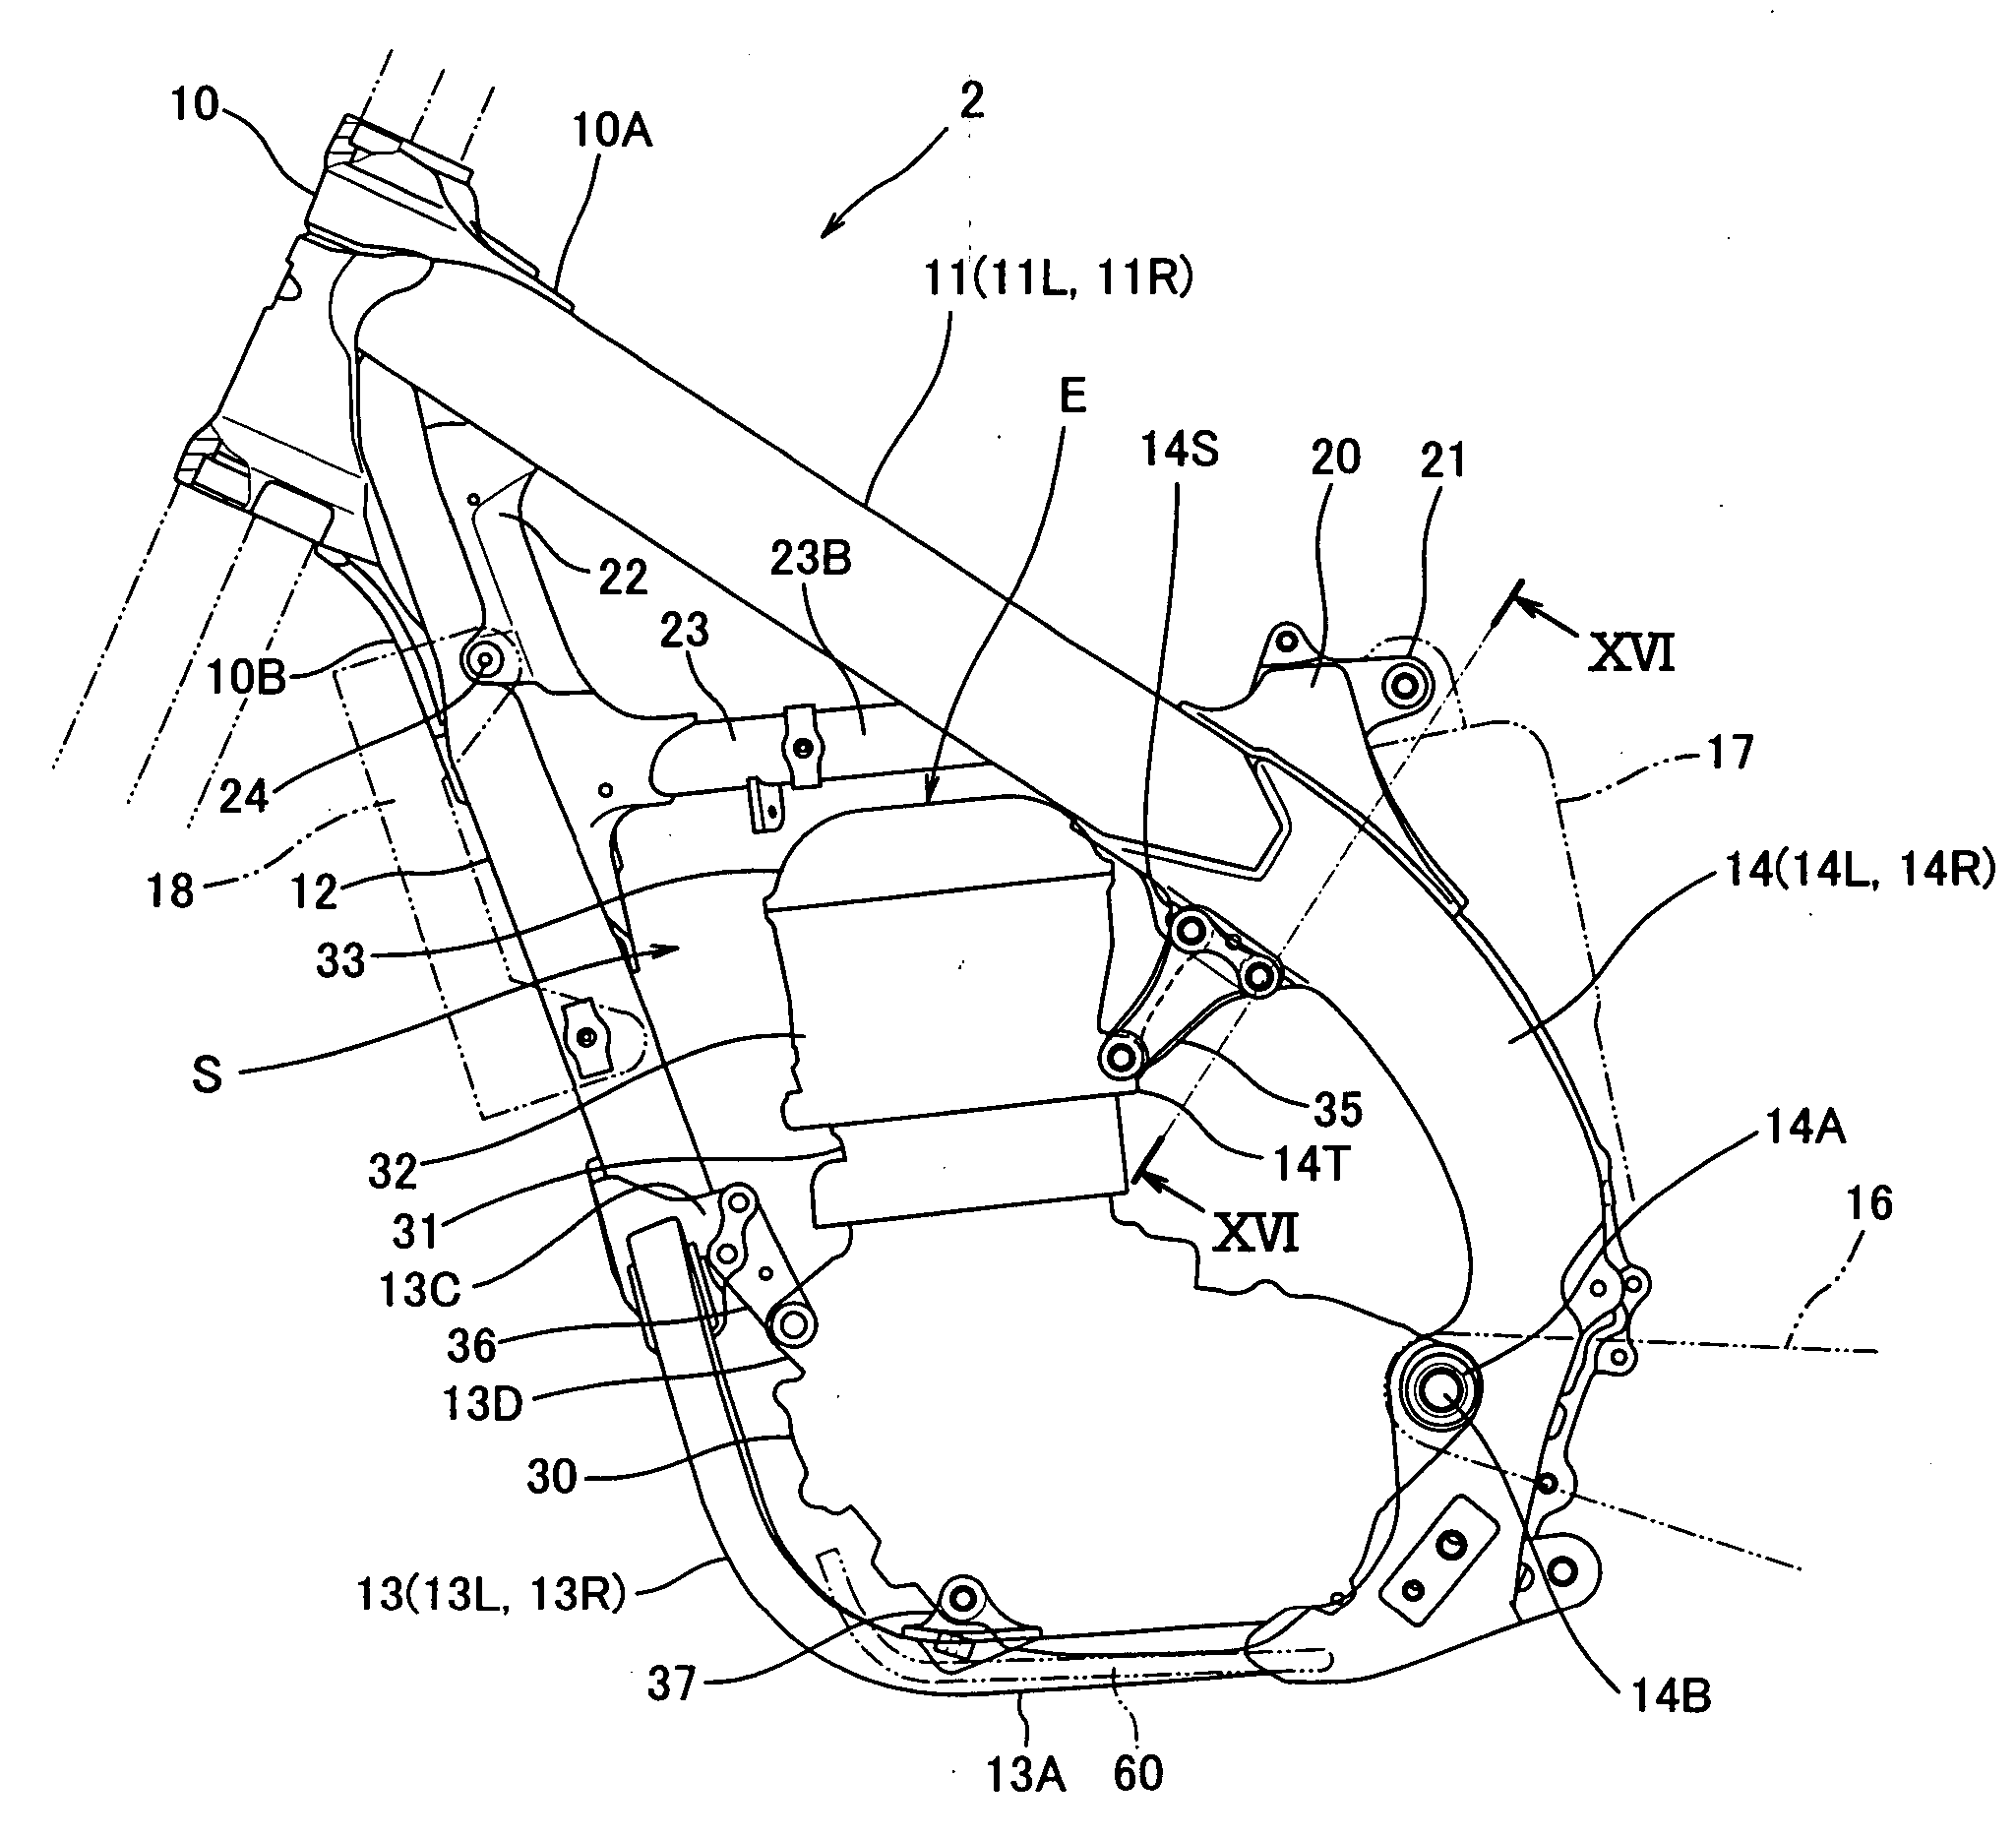 Frame of motorcycle and engine bracket